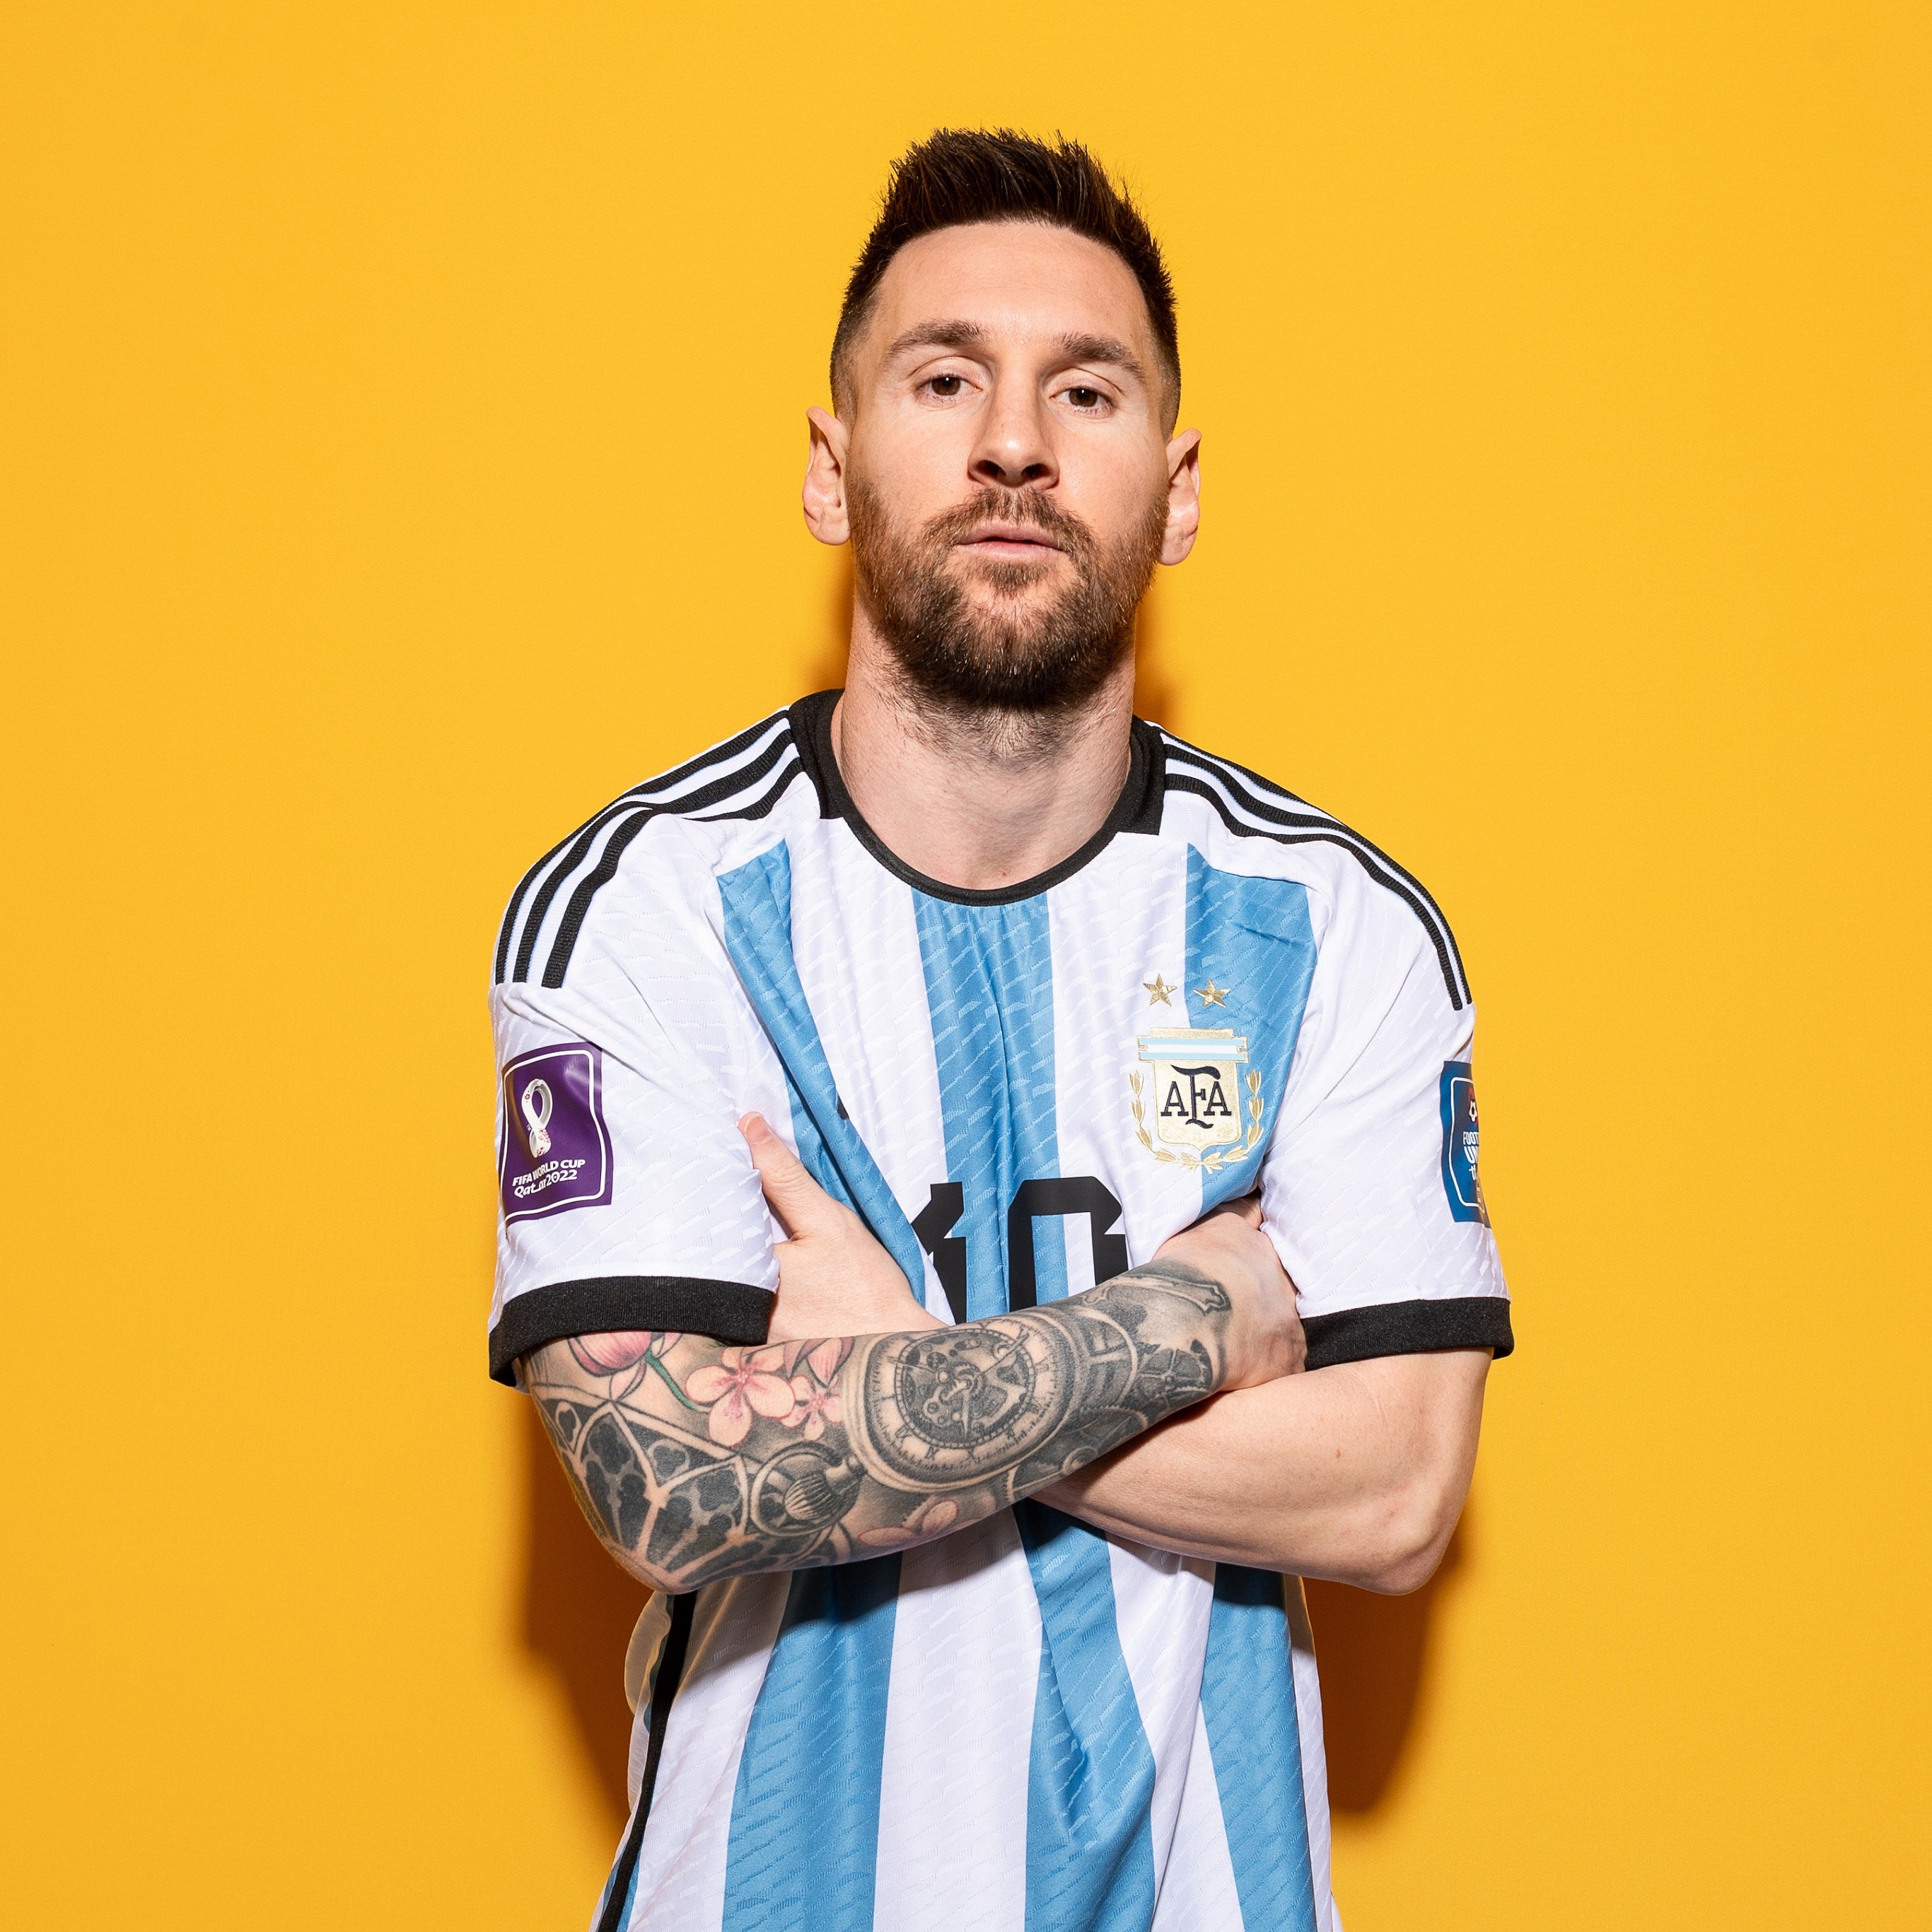 Messi Wallpapers - Top 30 Best Messi Wallpapers [ HQ ]